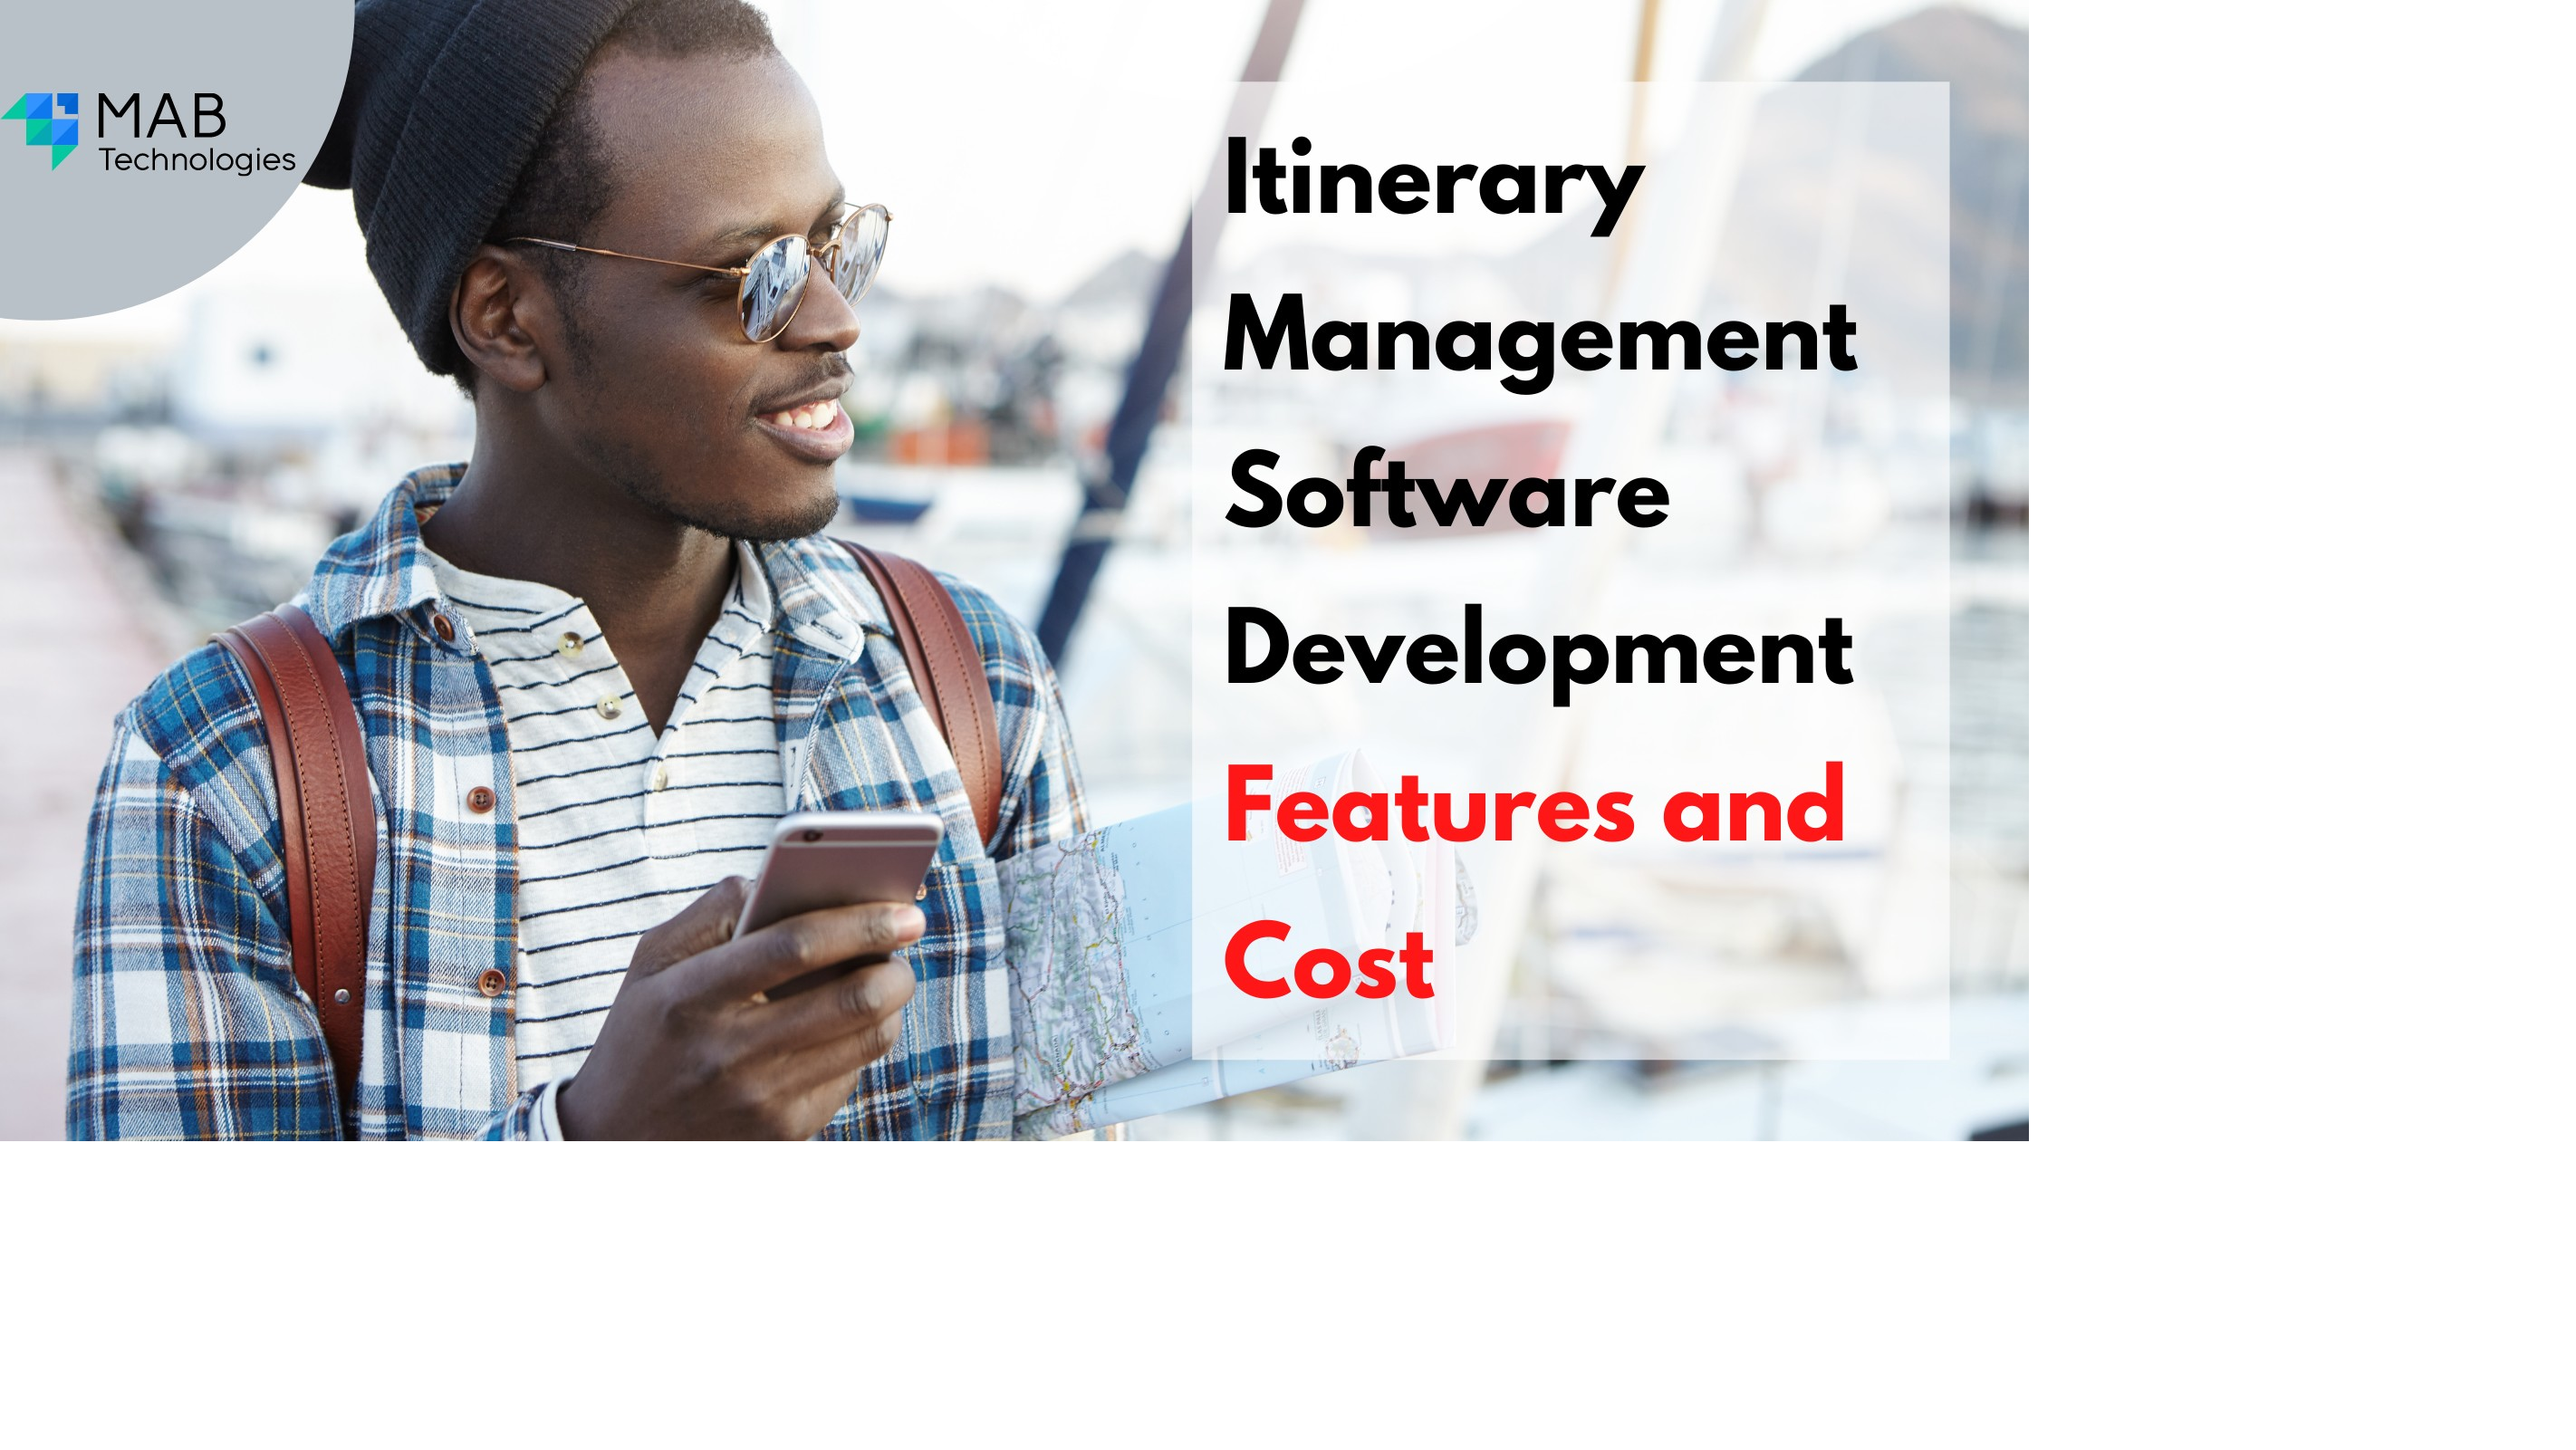 Itinerary Management Software Development Features and Cost 